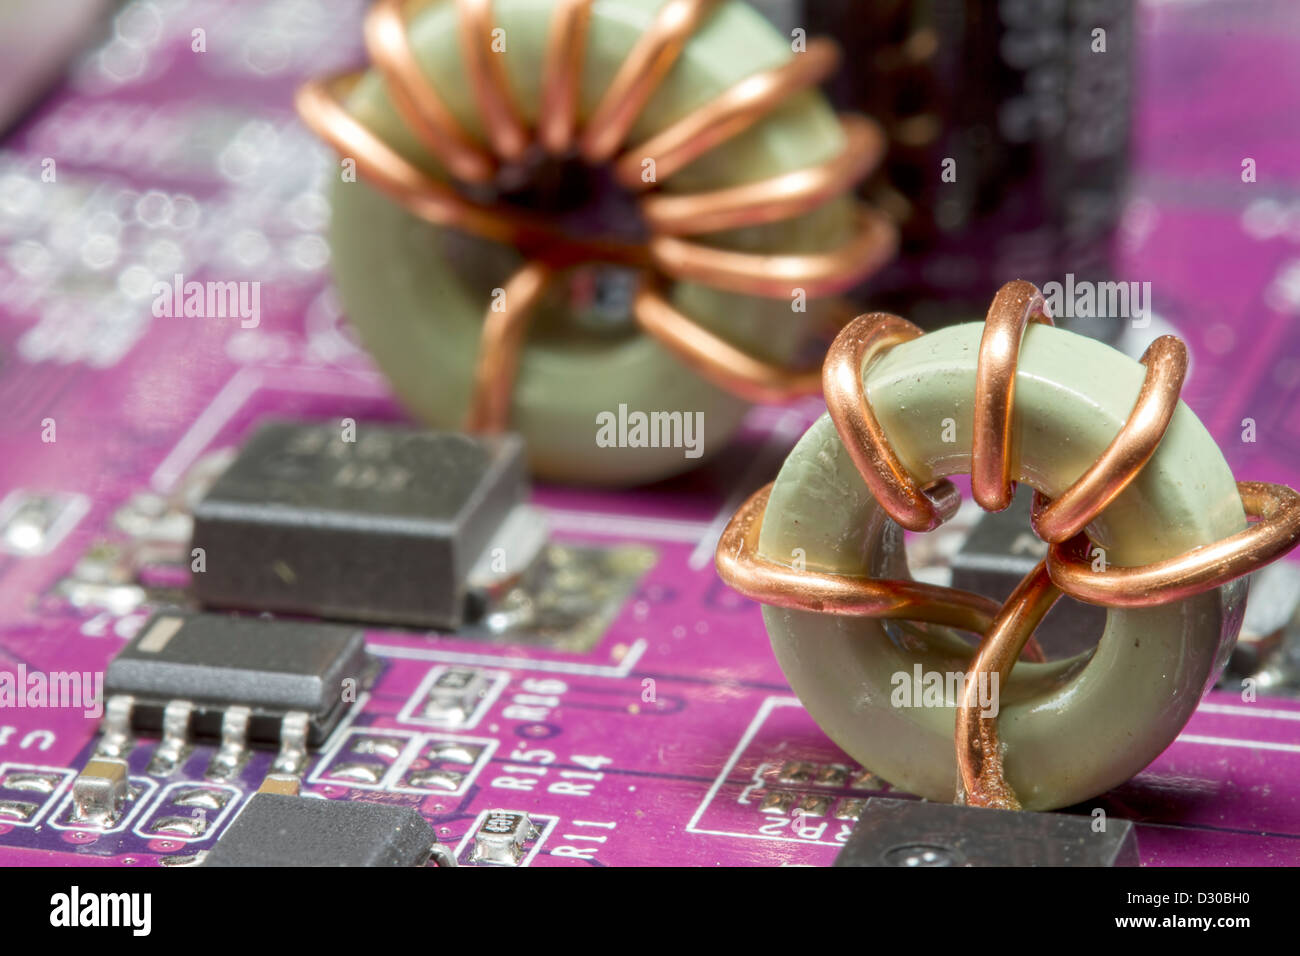 Close up image of electronic circuit board Stock Photo